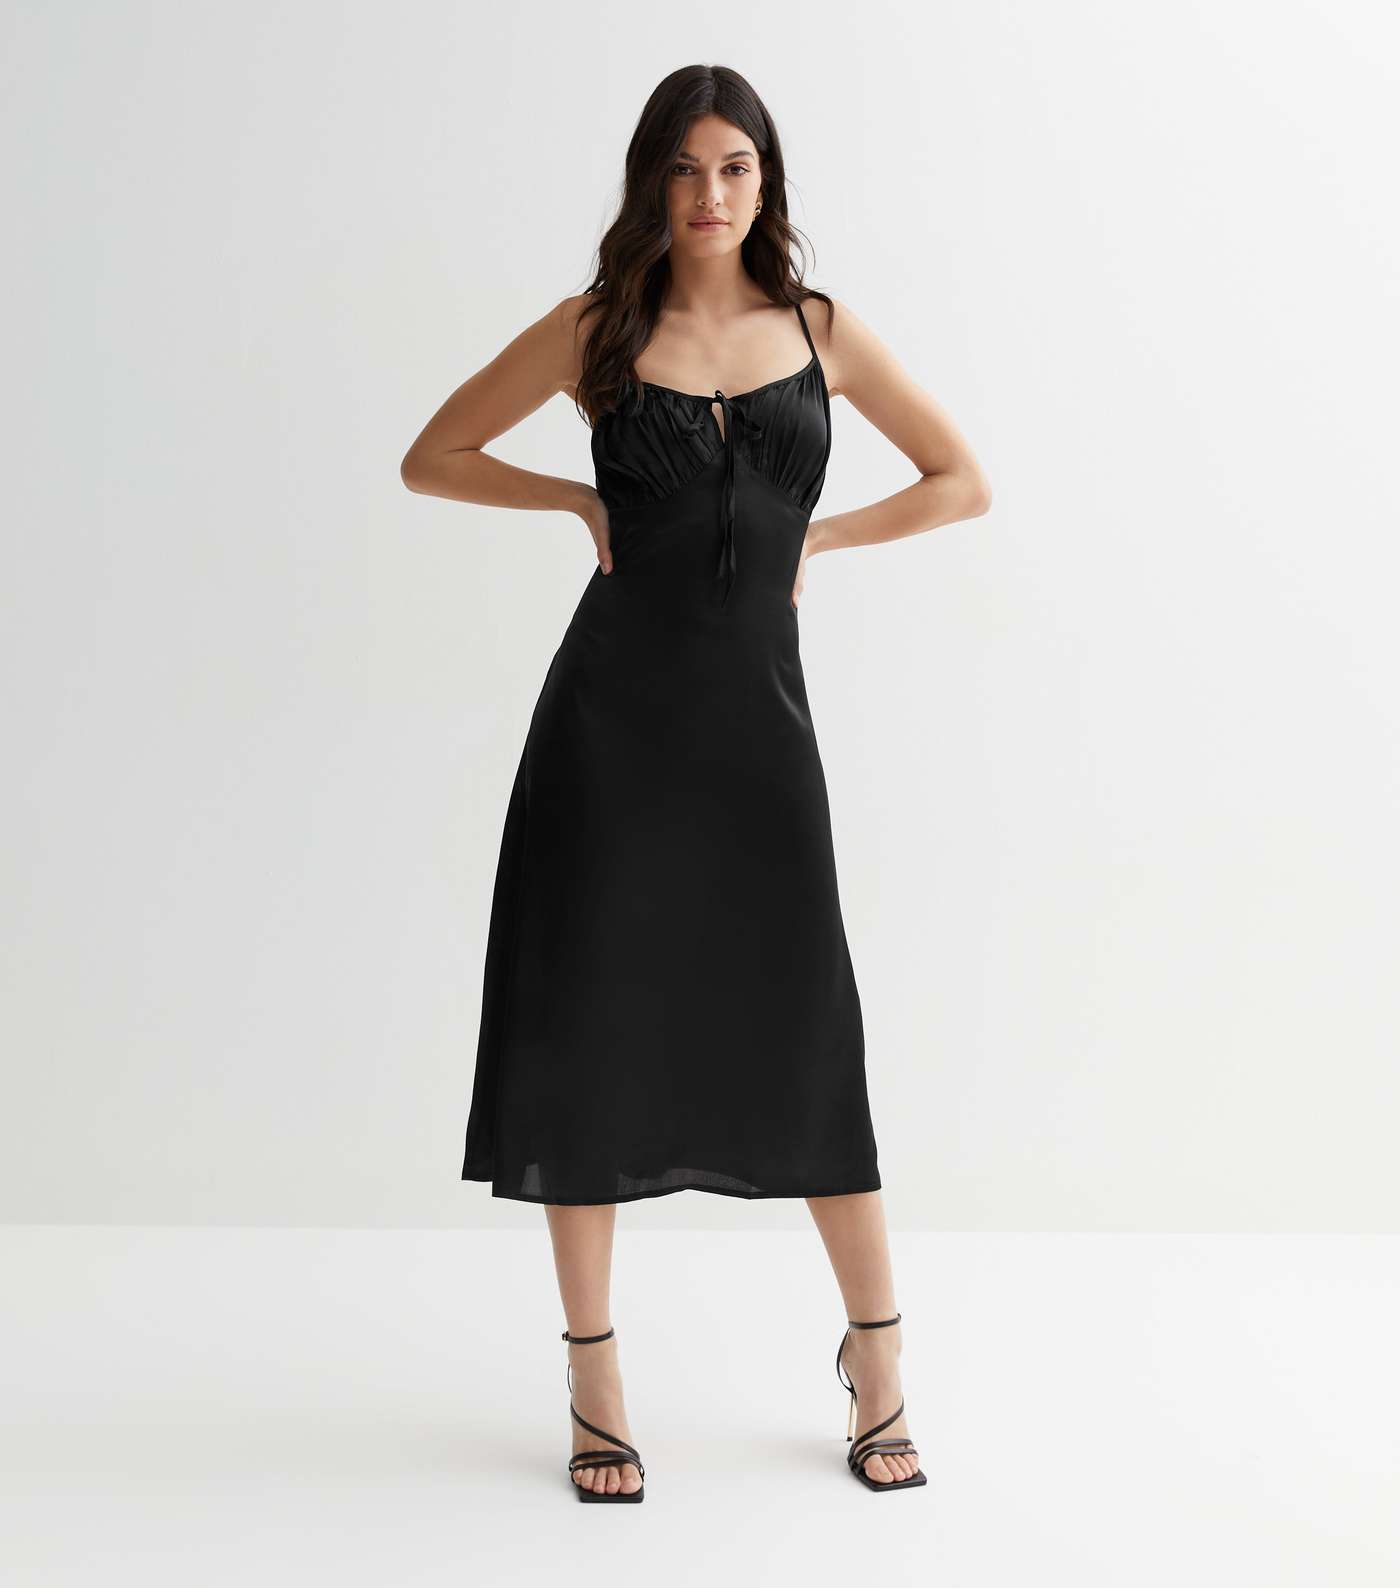 Influence Black Satin Ruched Tie Front Midi Dress